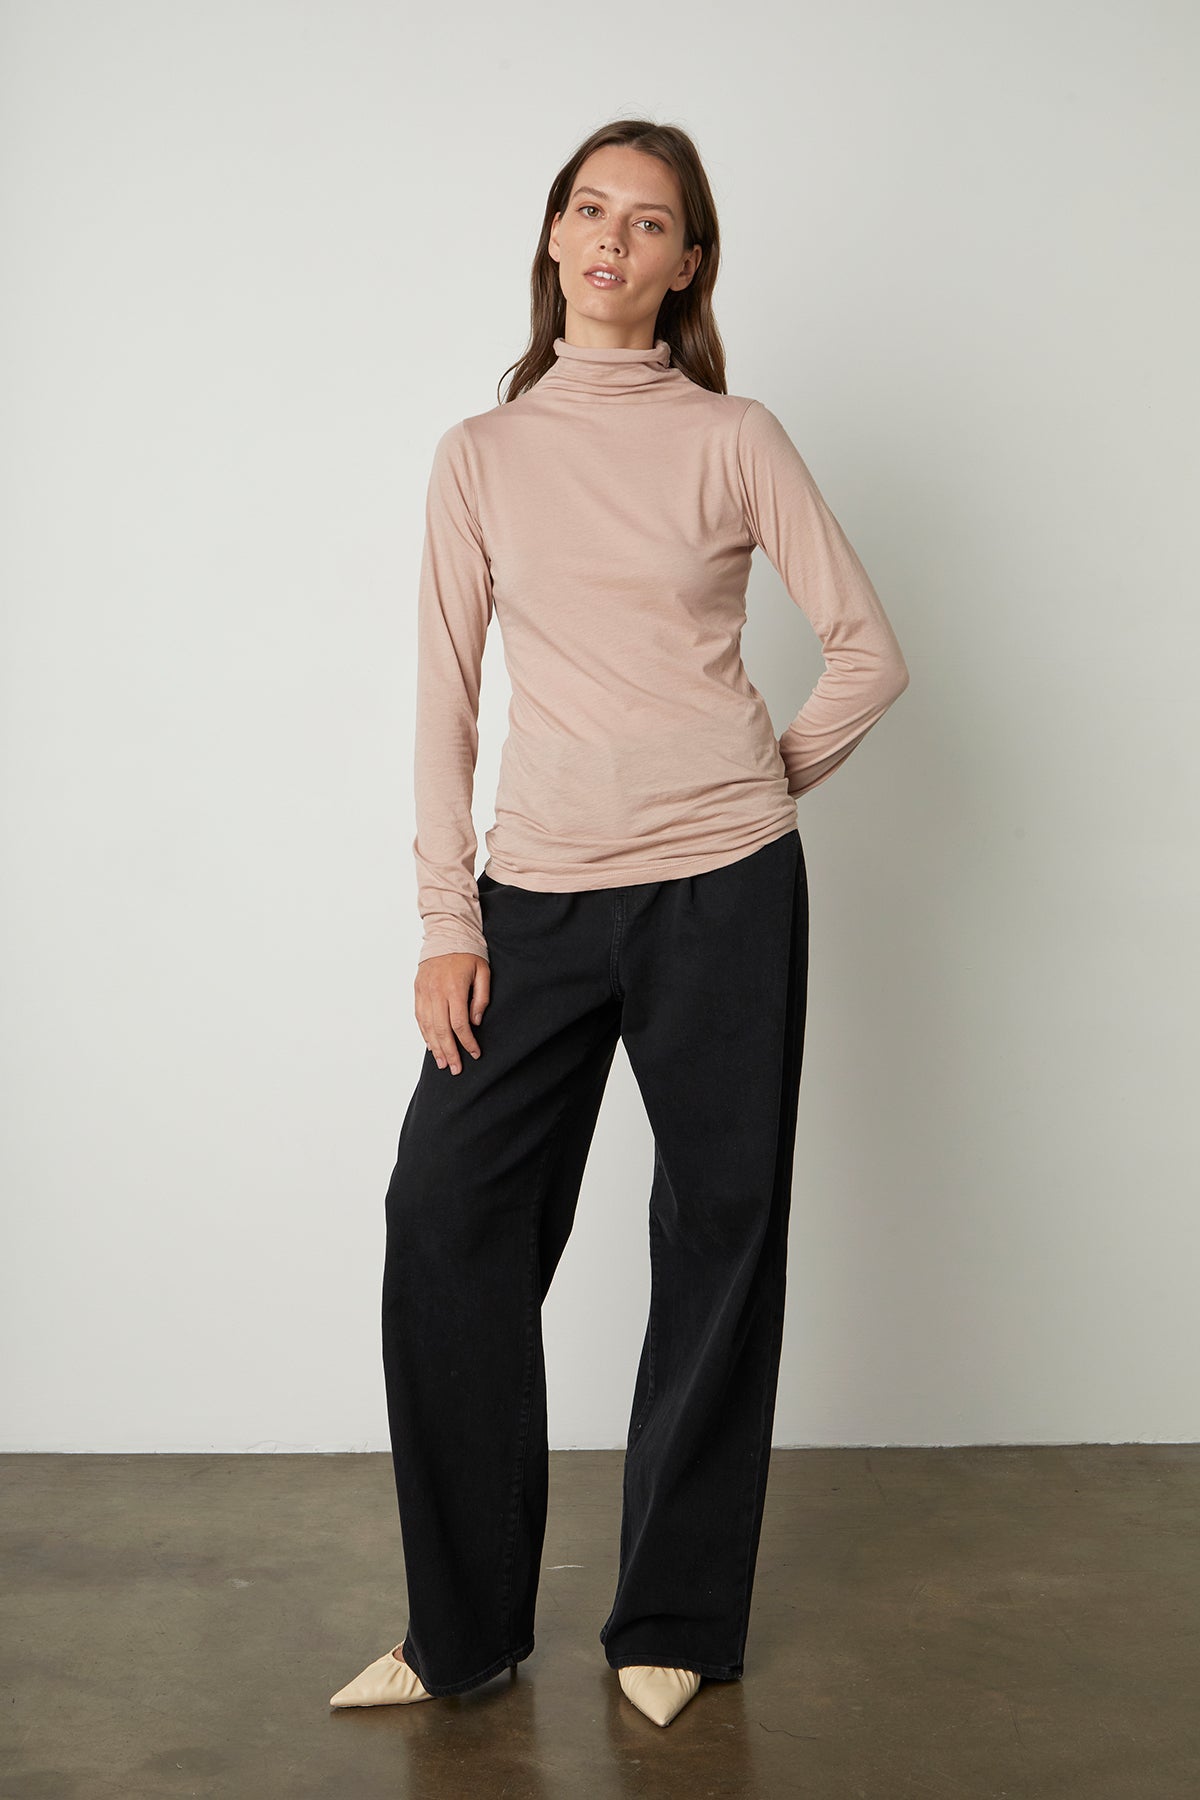   Model standing with arms folded wearing Talisia Gauzy Whisper Fitted Mock Neck Tee in rosegold with harlow denim in noir black with heels full length front 